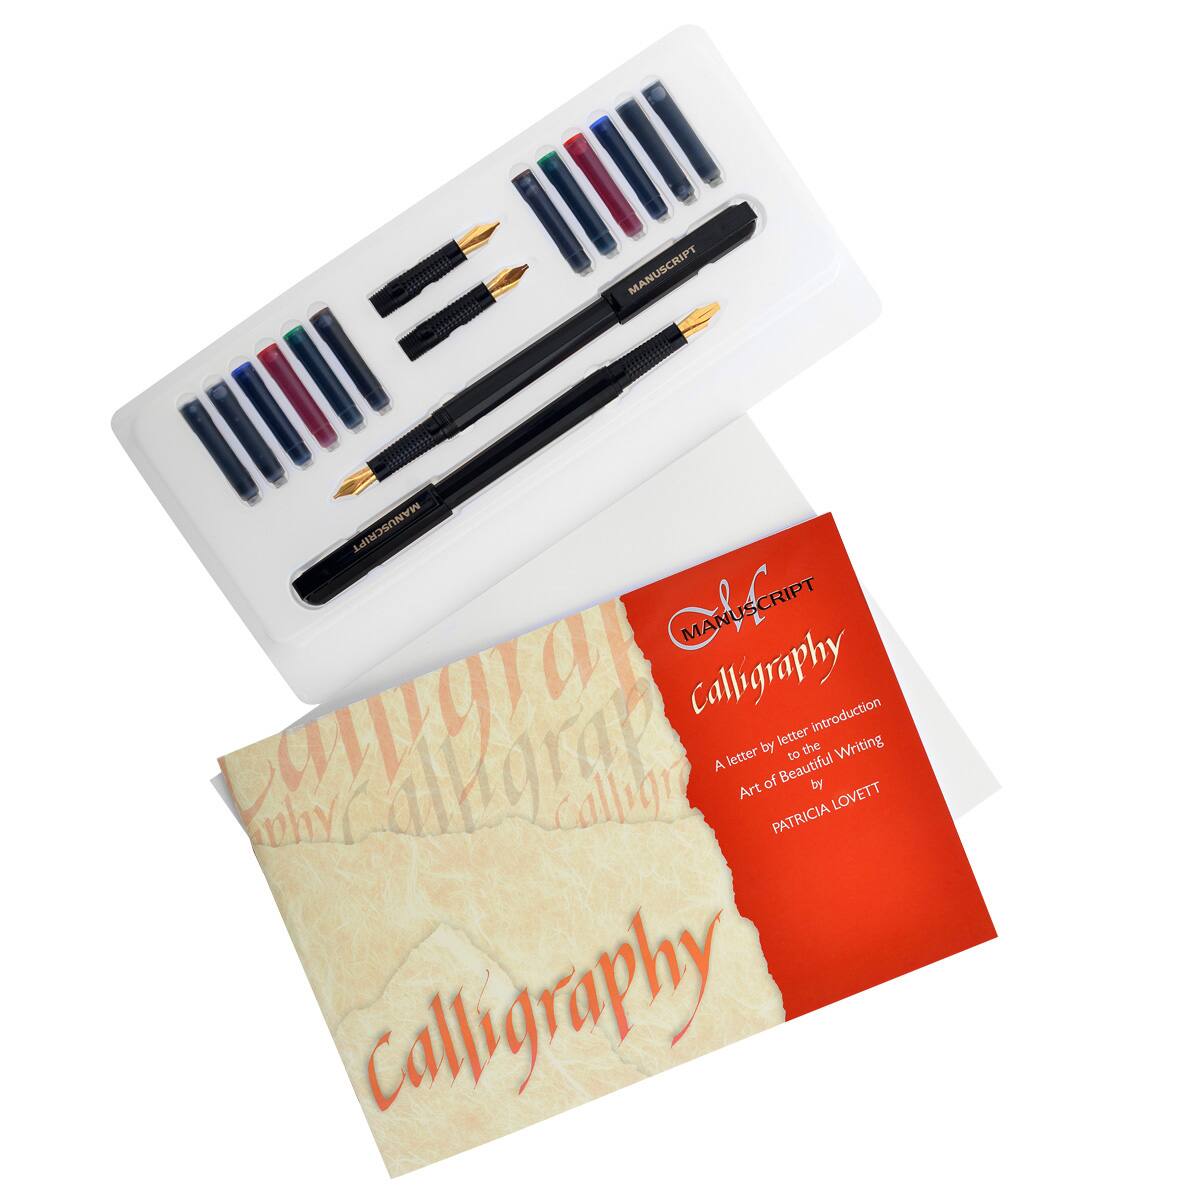 Ink cartridges Nibs Ideal for All Calligraphers! 24 Pieces Manuscript Masterclass Calligraphy Set A5 Practice Pad Guideline Sheets and Calligraphy Manual Classic Fountain Pens 